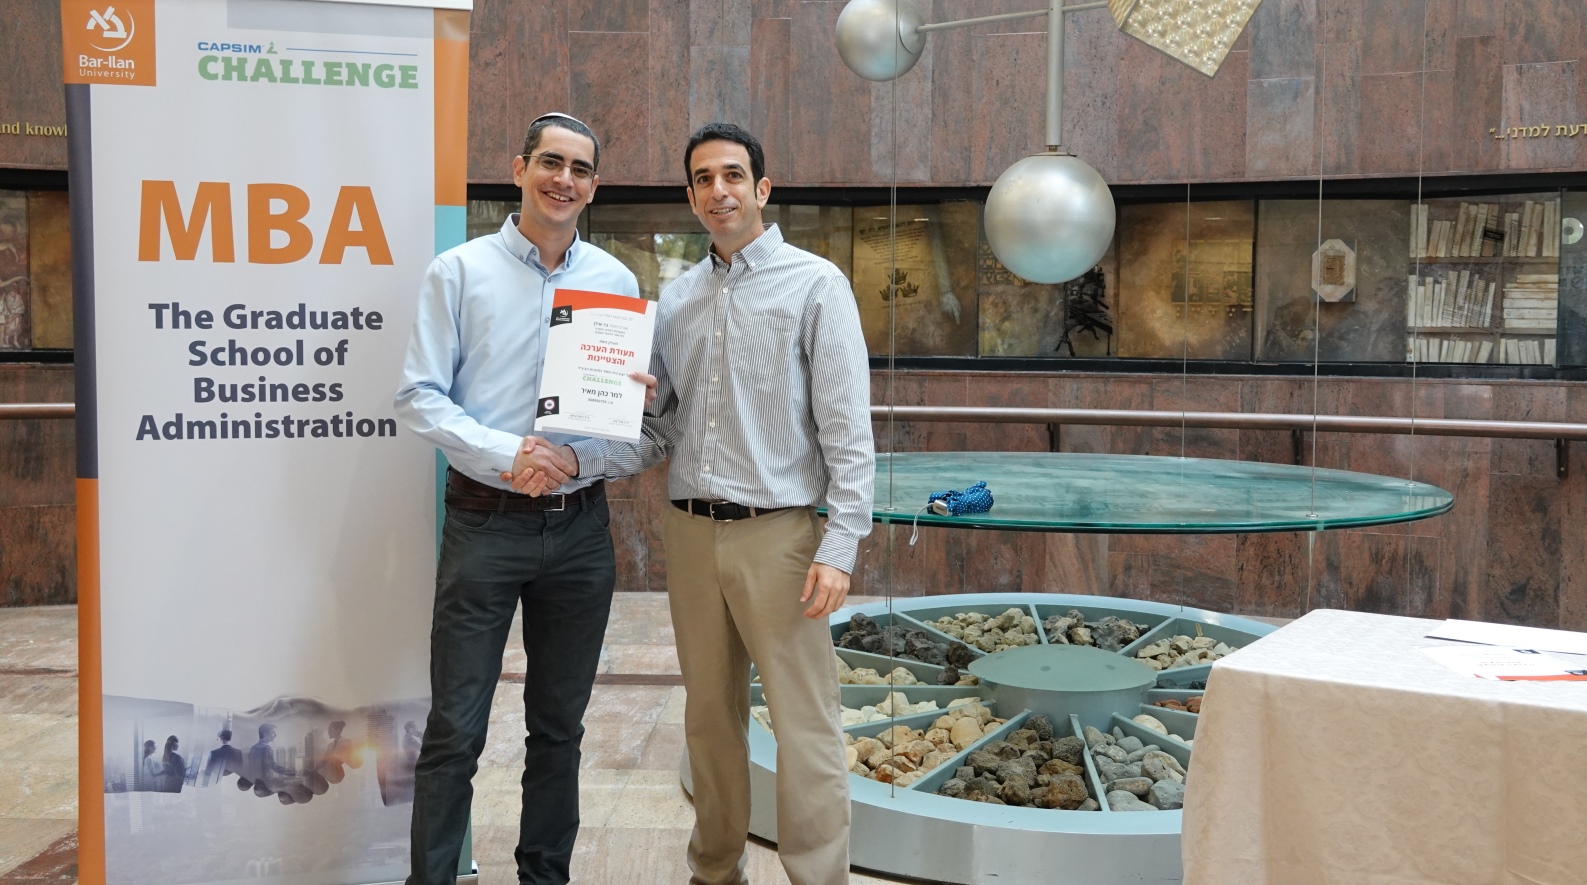 First place winner student Meir Cohen, left, and Dr. Raveh Harush from Bar-Ilan Universityâ€™s Graduate School of Business Administration at a ceremony celebrating Cohen's Capsim Challenge win. Photo: courtesy